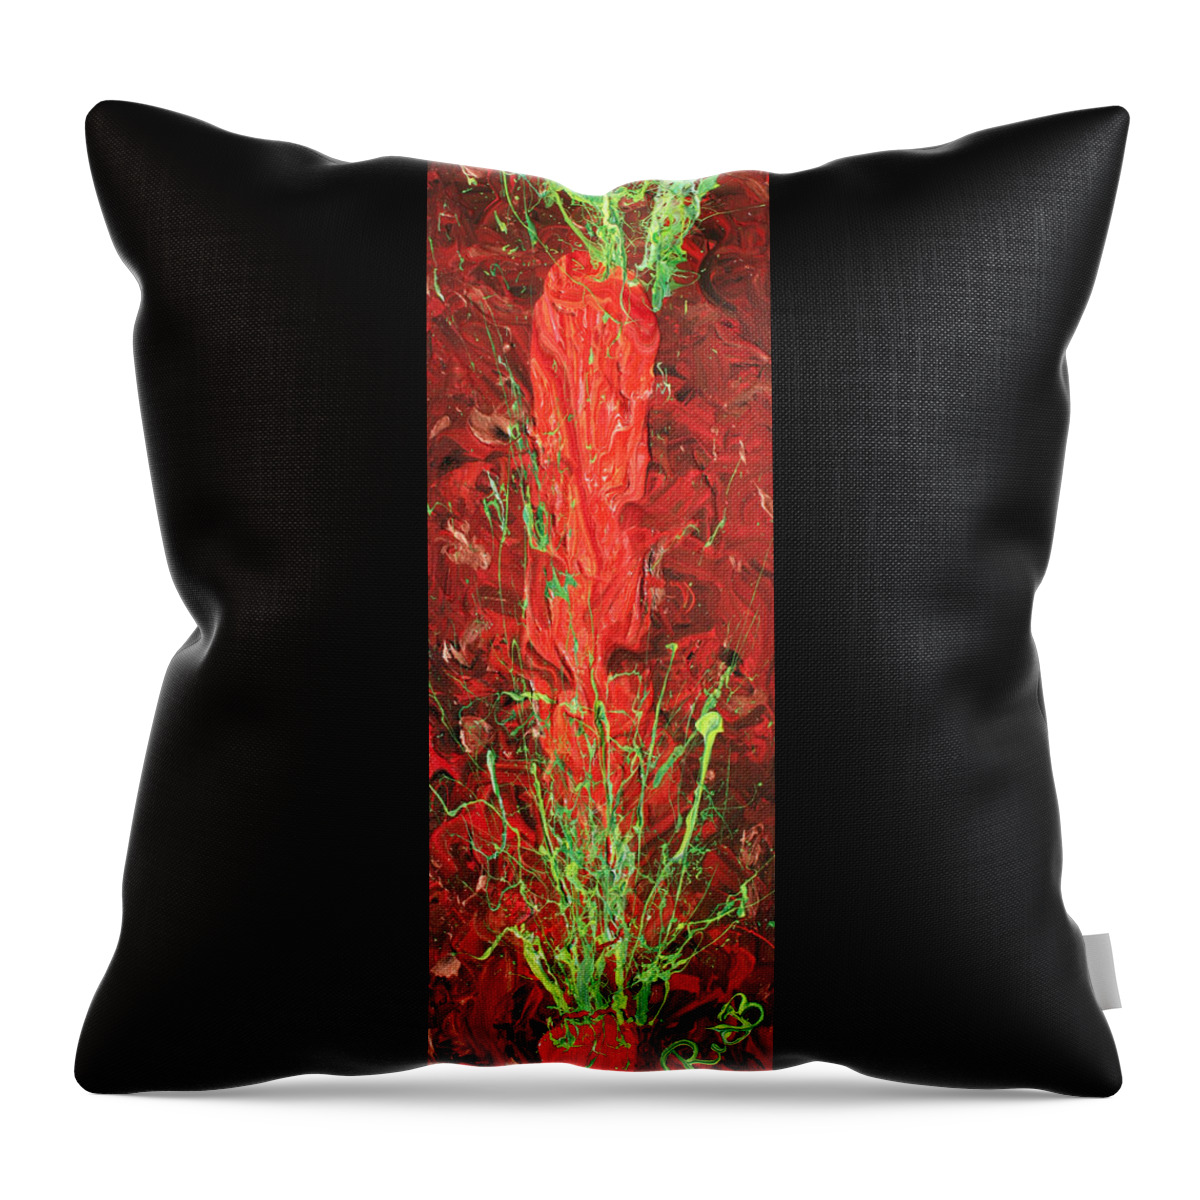 Acrylic Throw Pillow featuring the painting On Carrot Row by Ric Bascobert